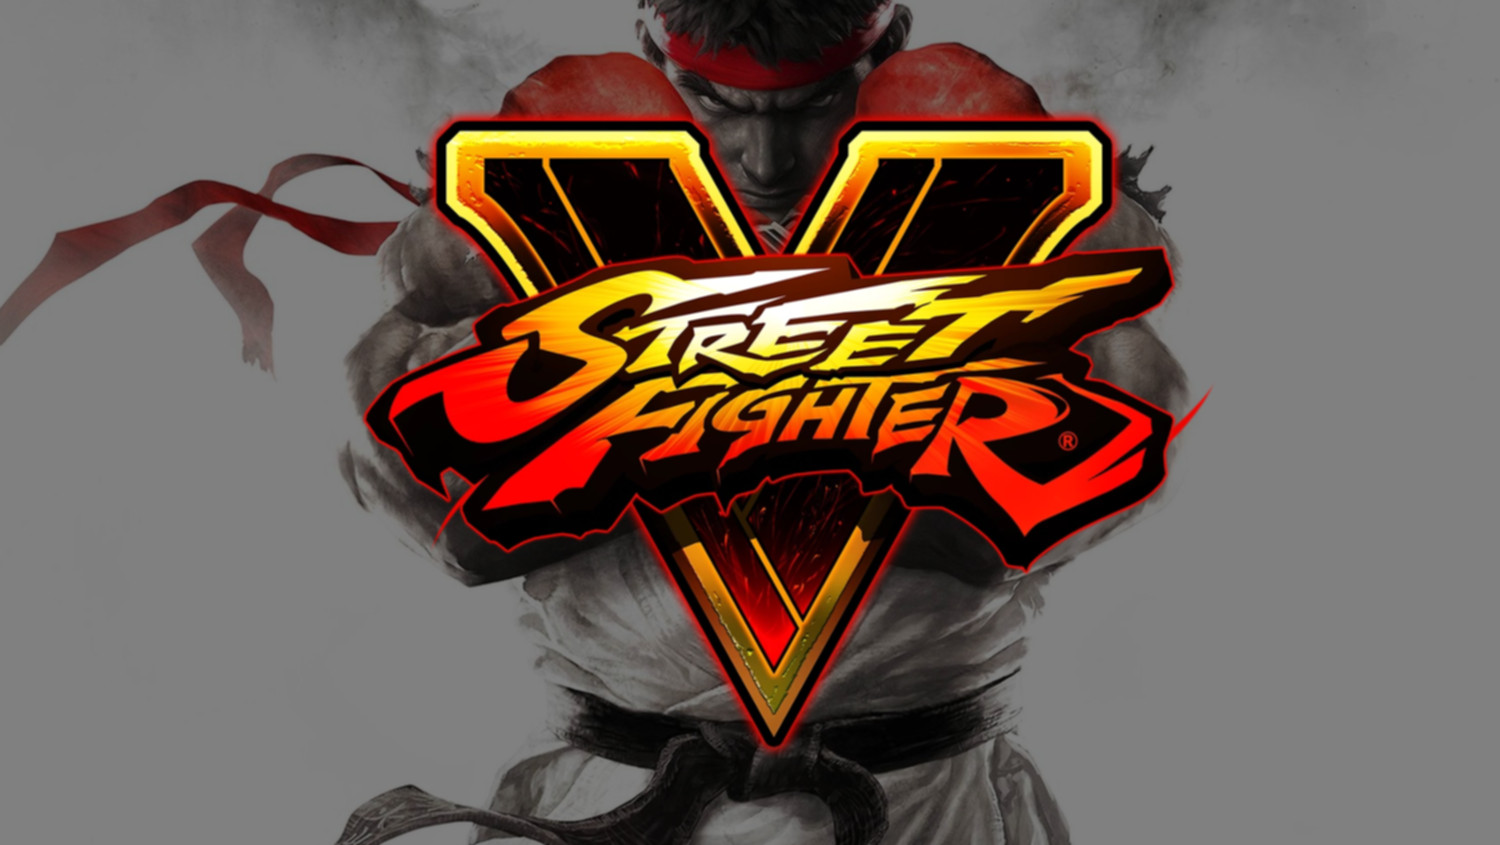 https://lanets.ca/static/images/tournaments_img/list/streetFighter_img.jpg